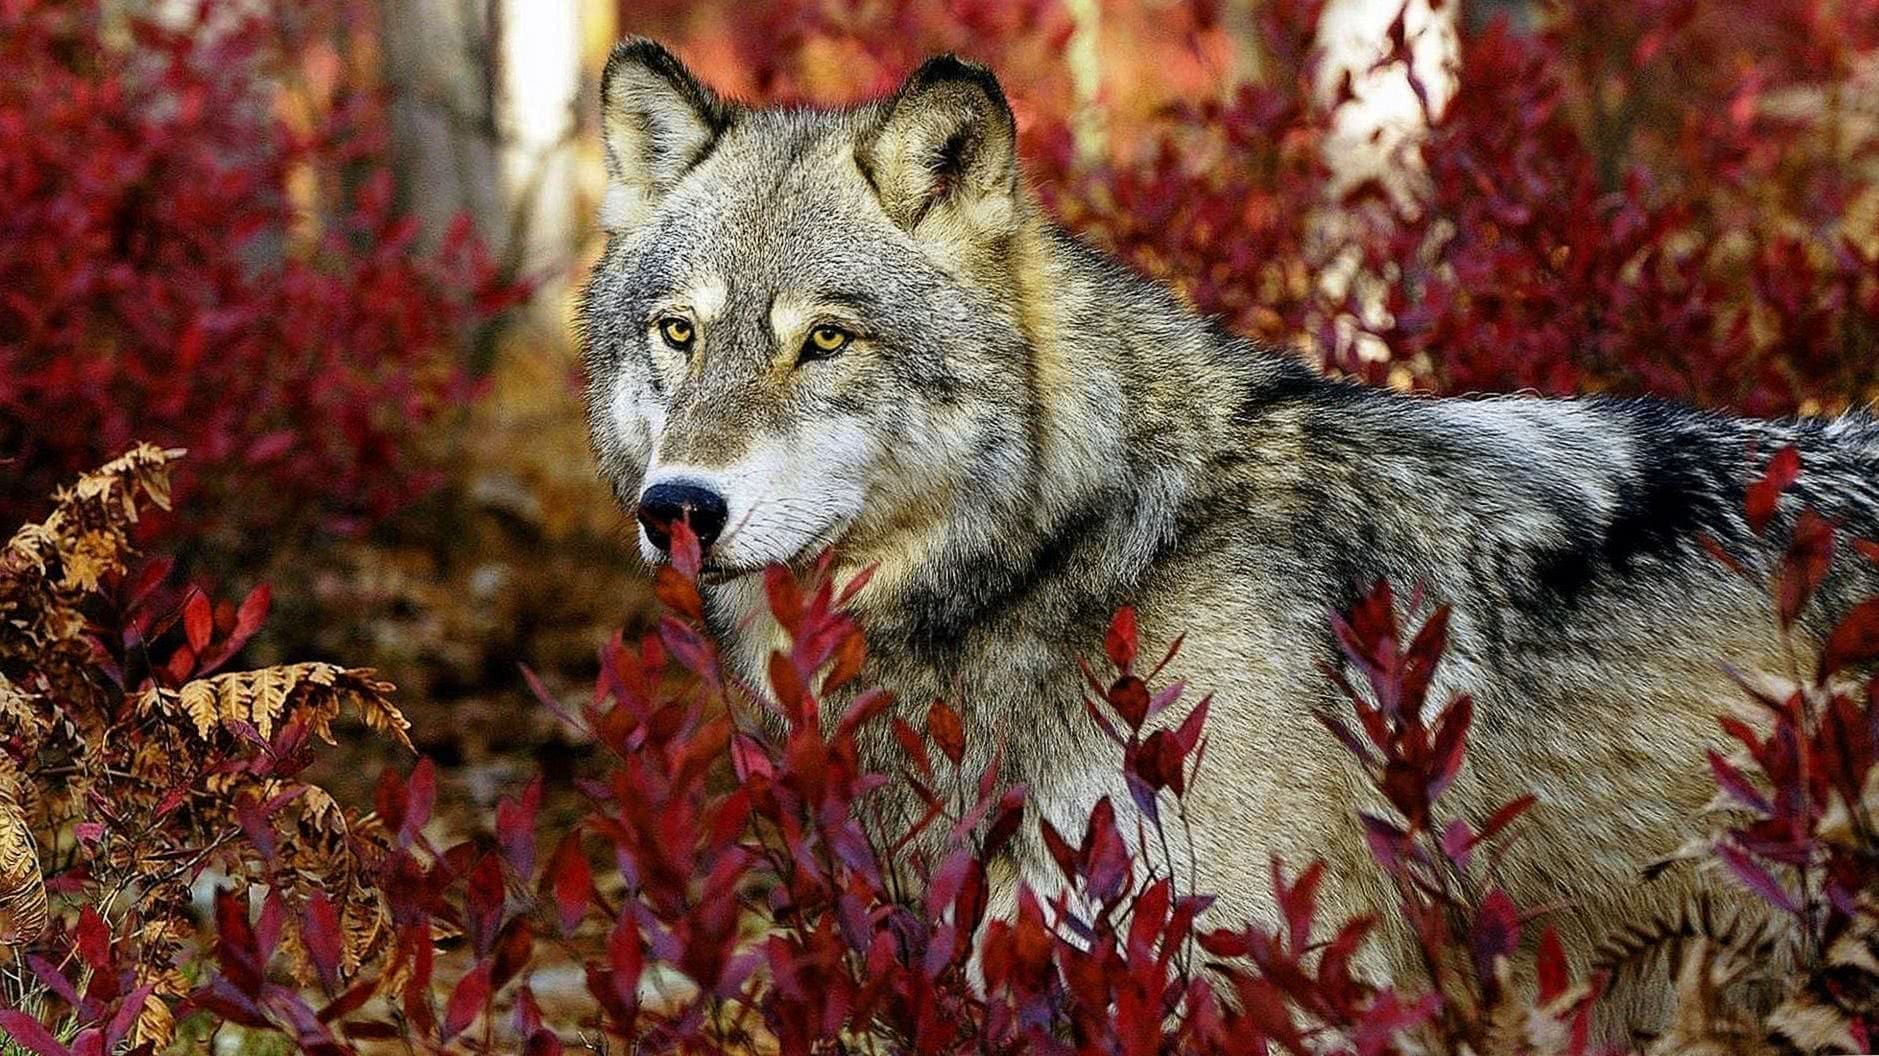 1920×1080 wallpaper hd wolf background image 4